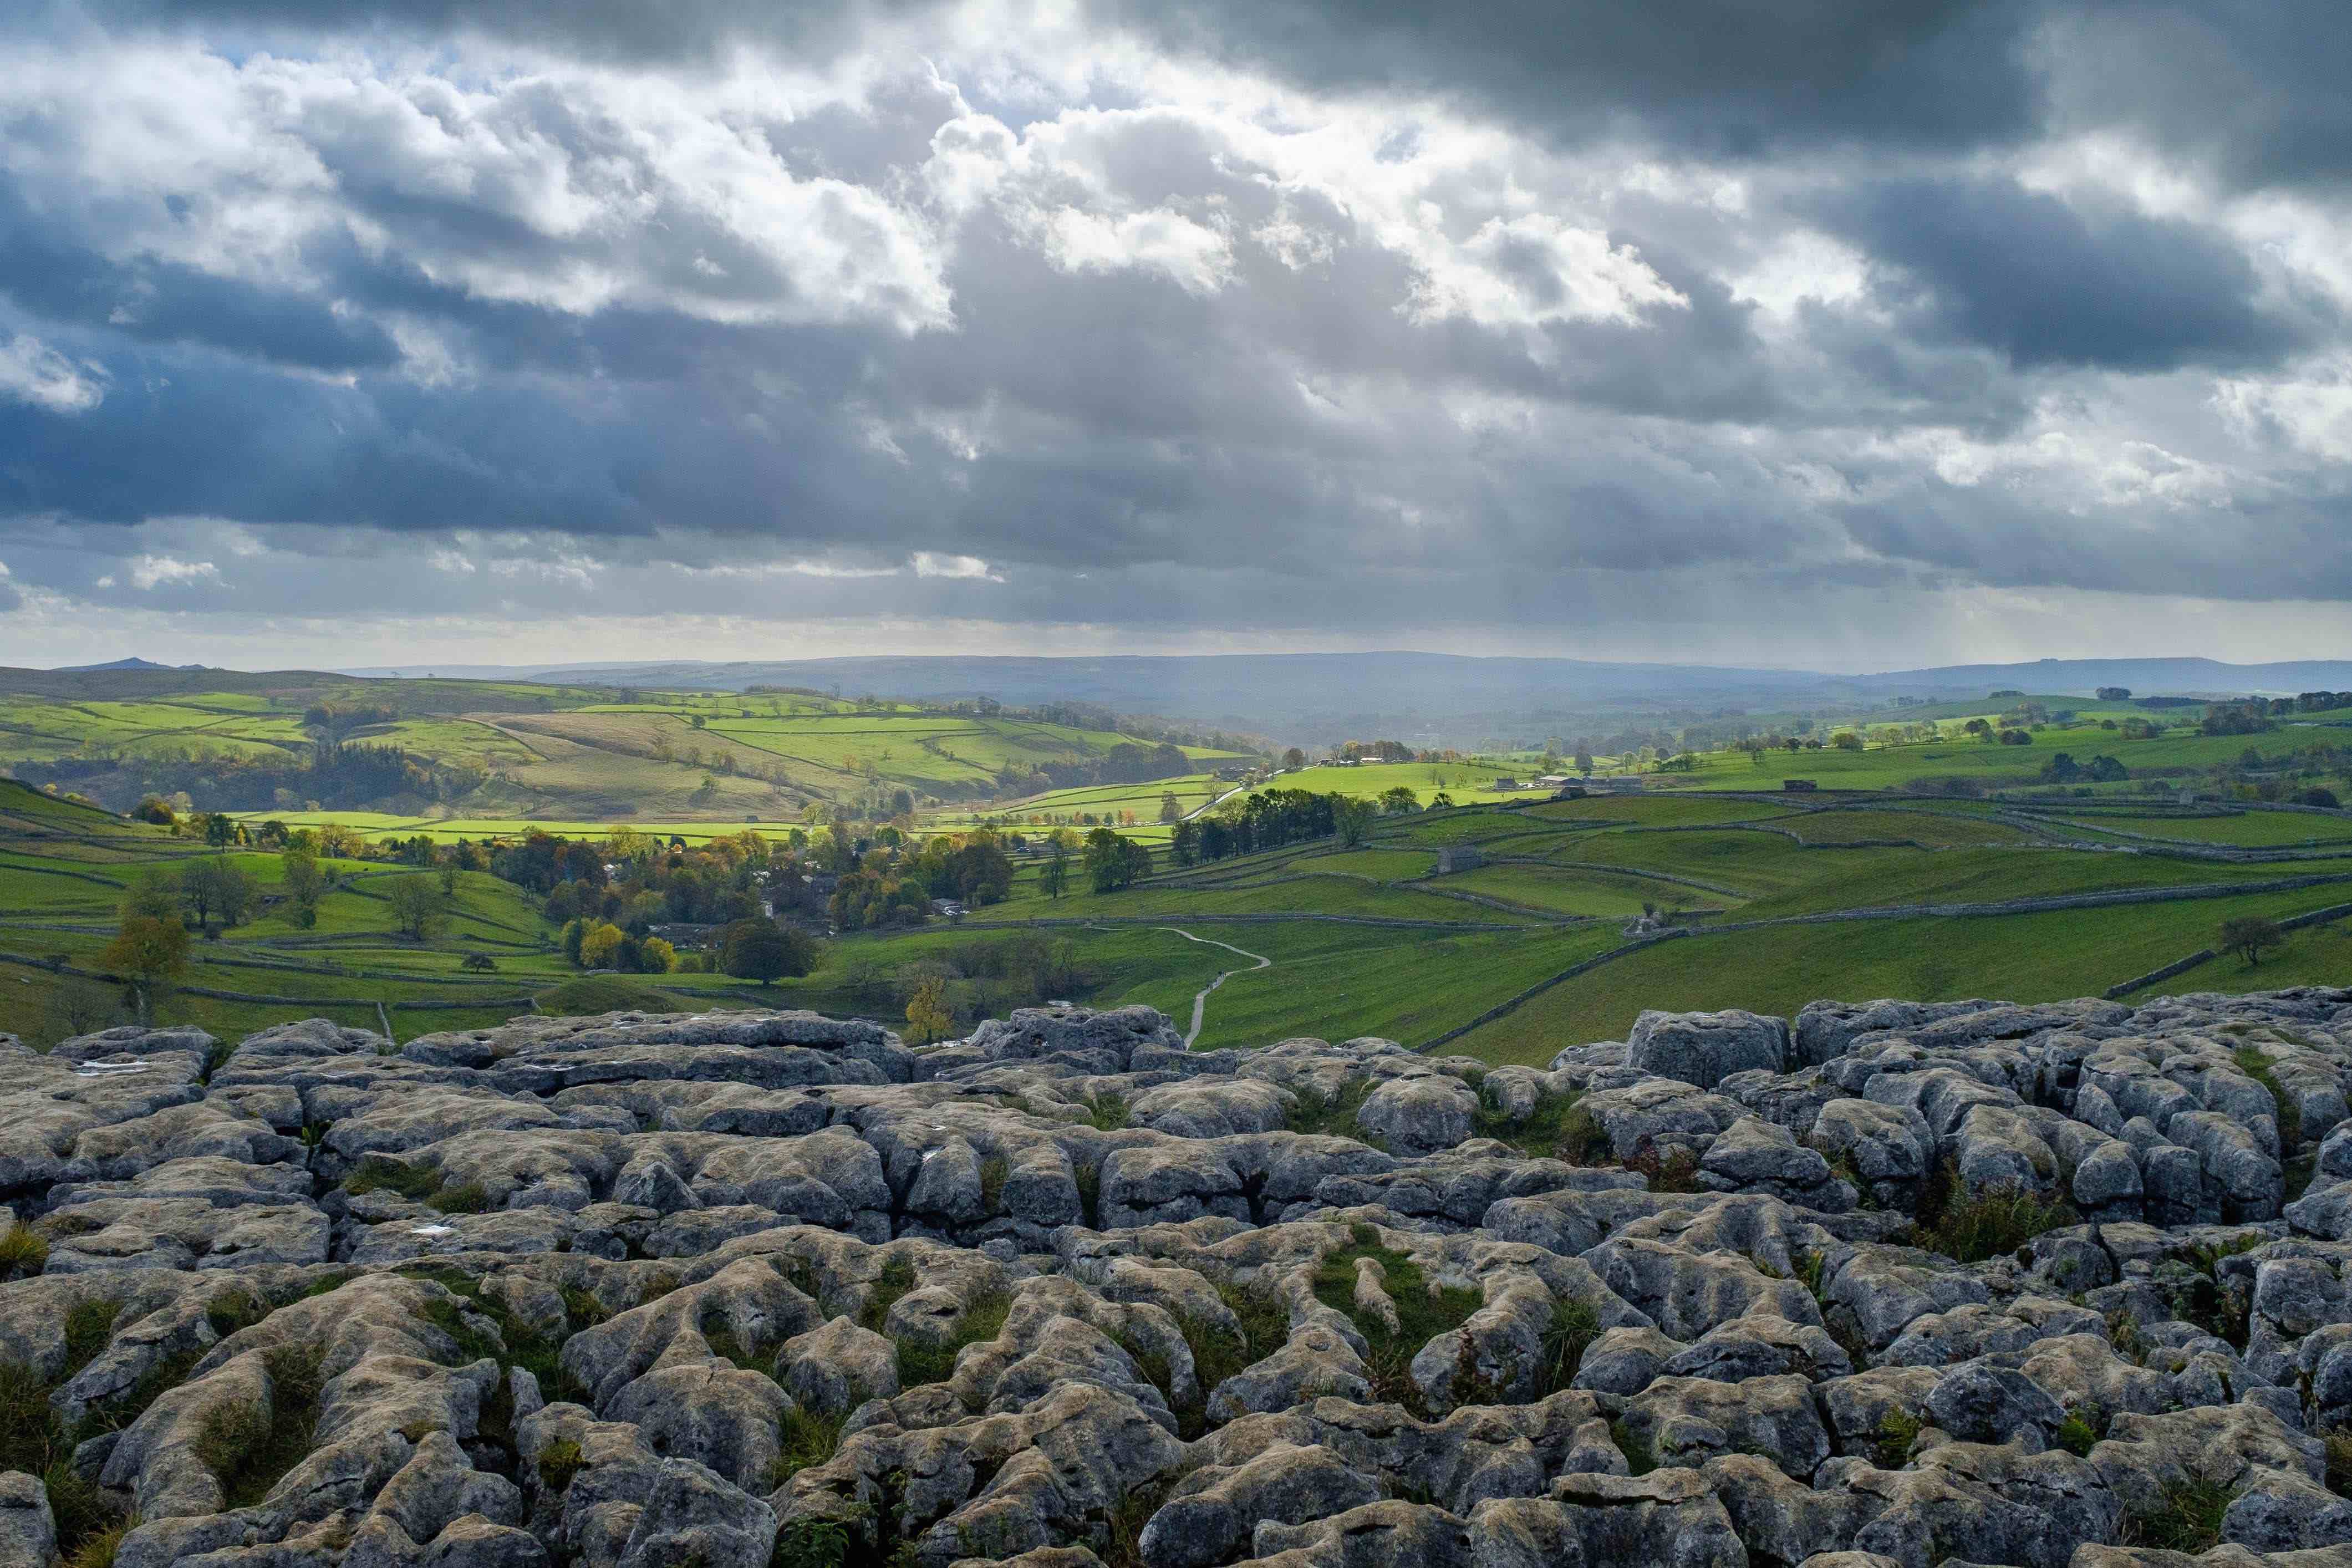 grey rocks that create a limestone pavement geological feature in the foreground with green hills in the background with sun through broken clouds